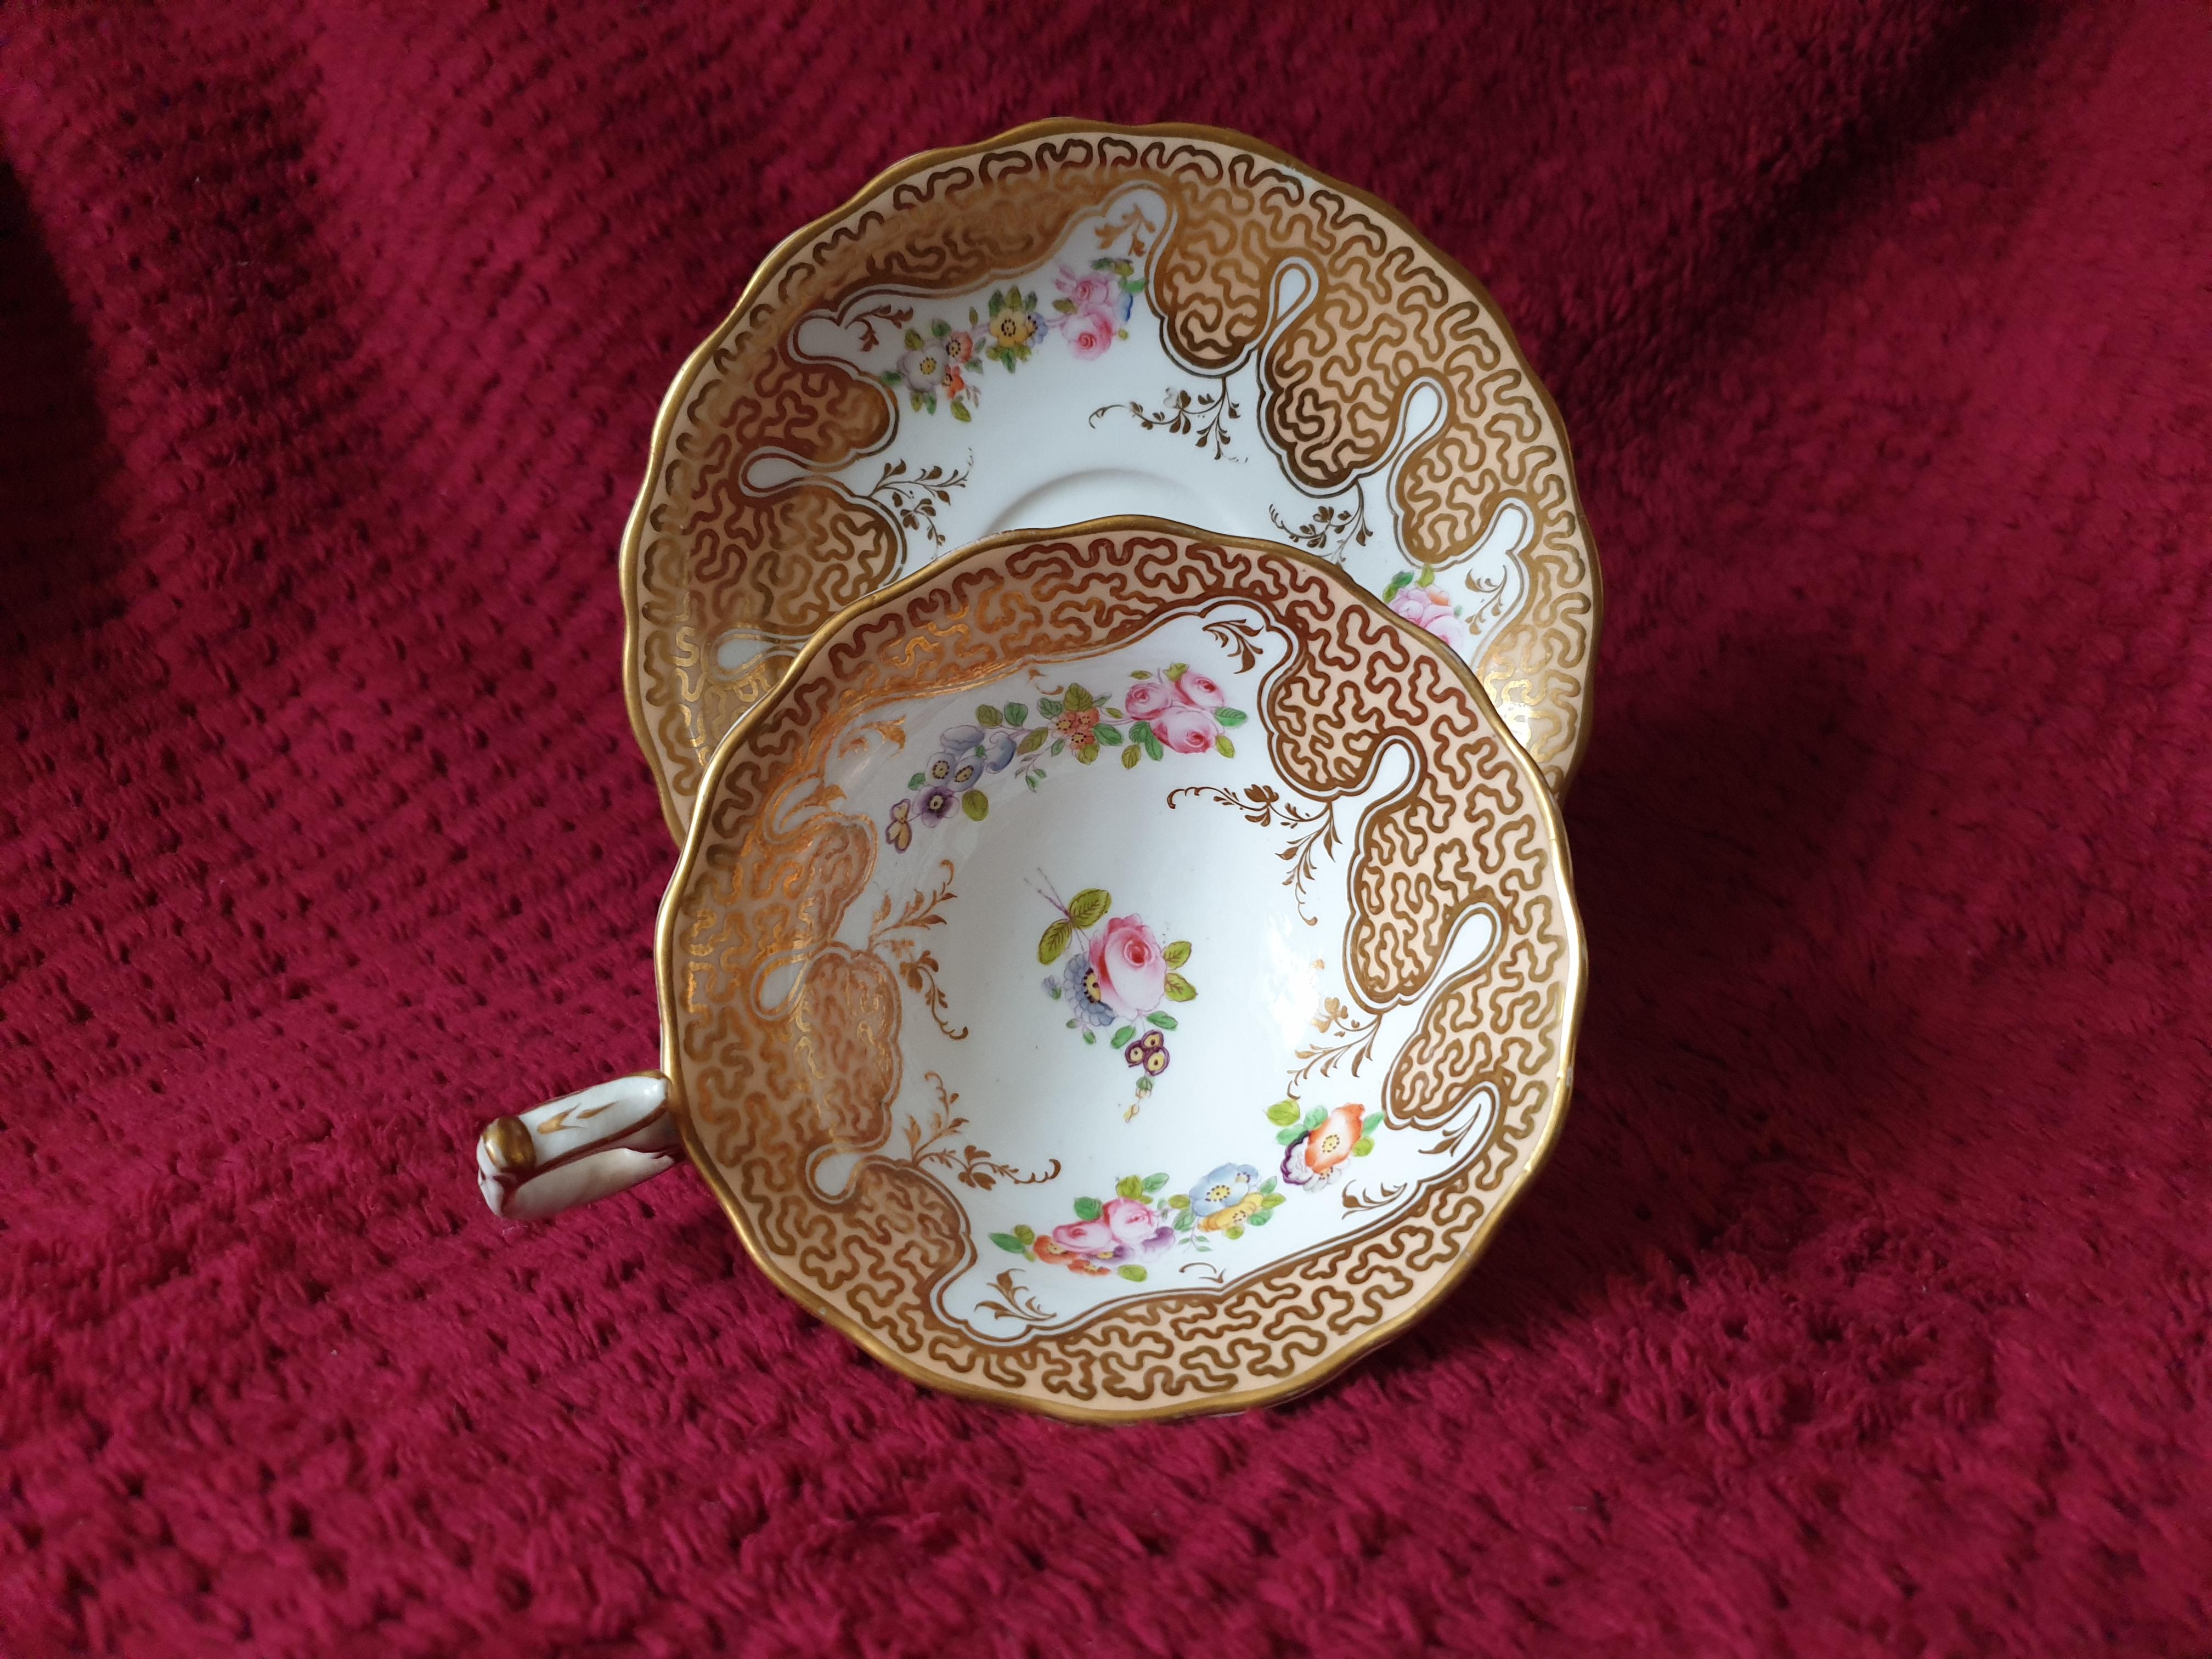 This delightful cup and saucer by H&R Daniel comes with an intricate scroll design on a peach ground. Beautiful summery flowers handpainted at the base  and around inside the cup and inbetween the scroll design on the saucer accentuate or give